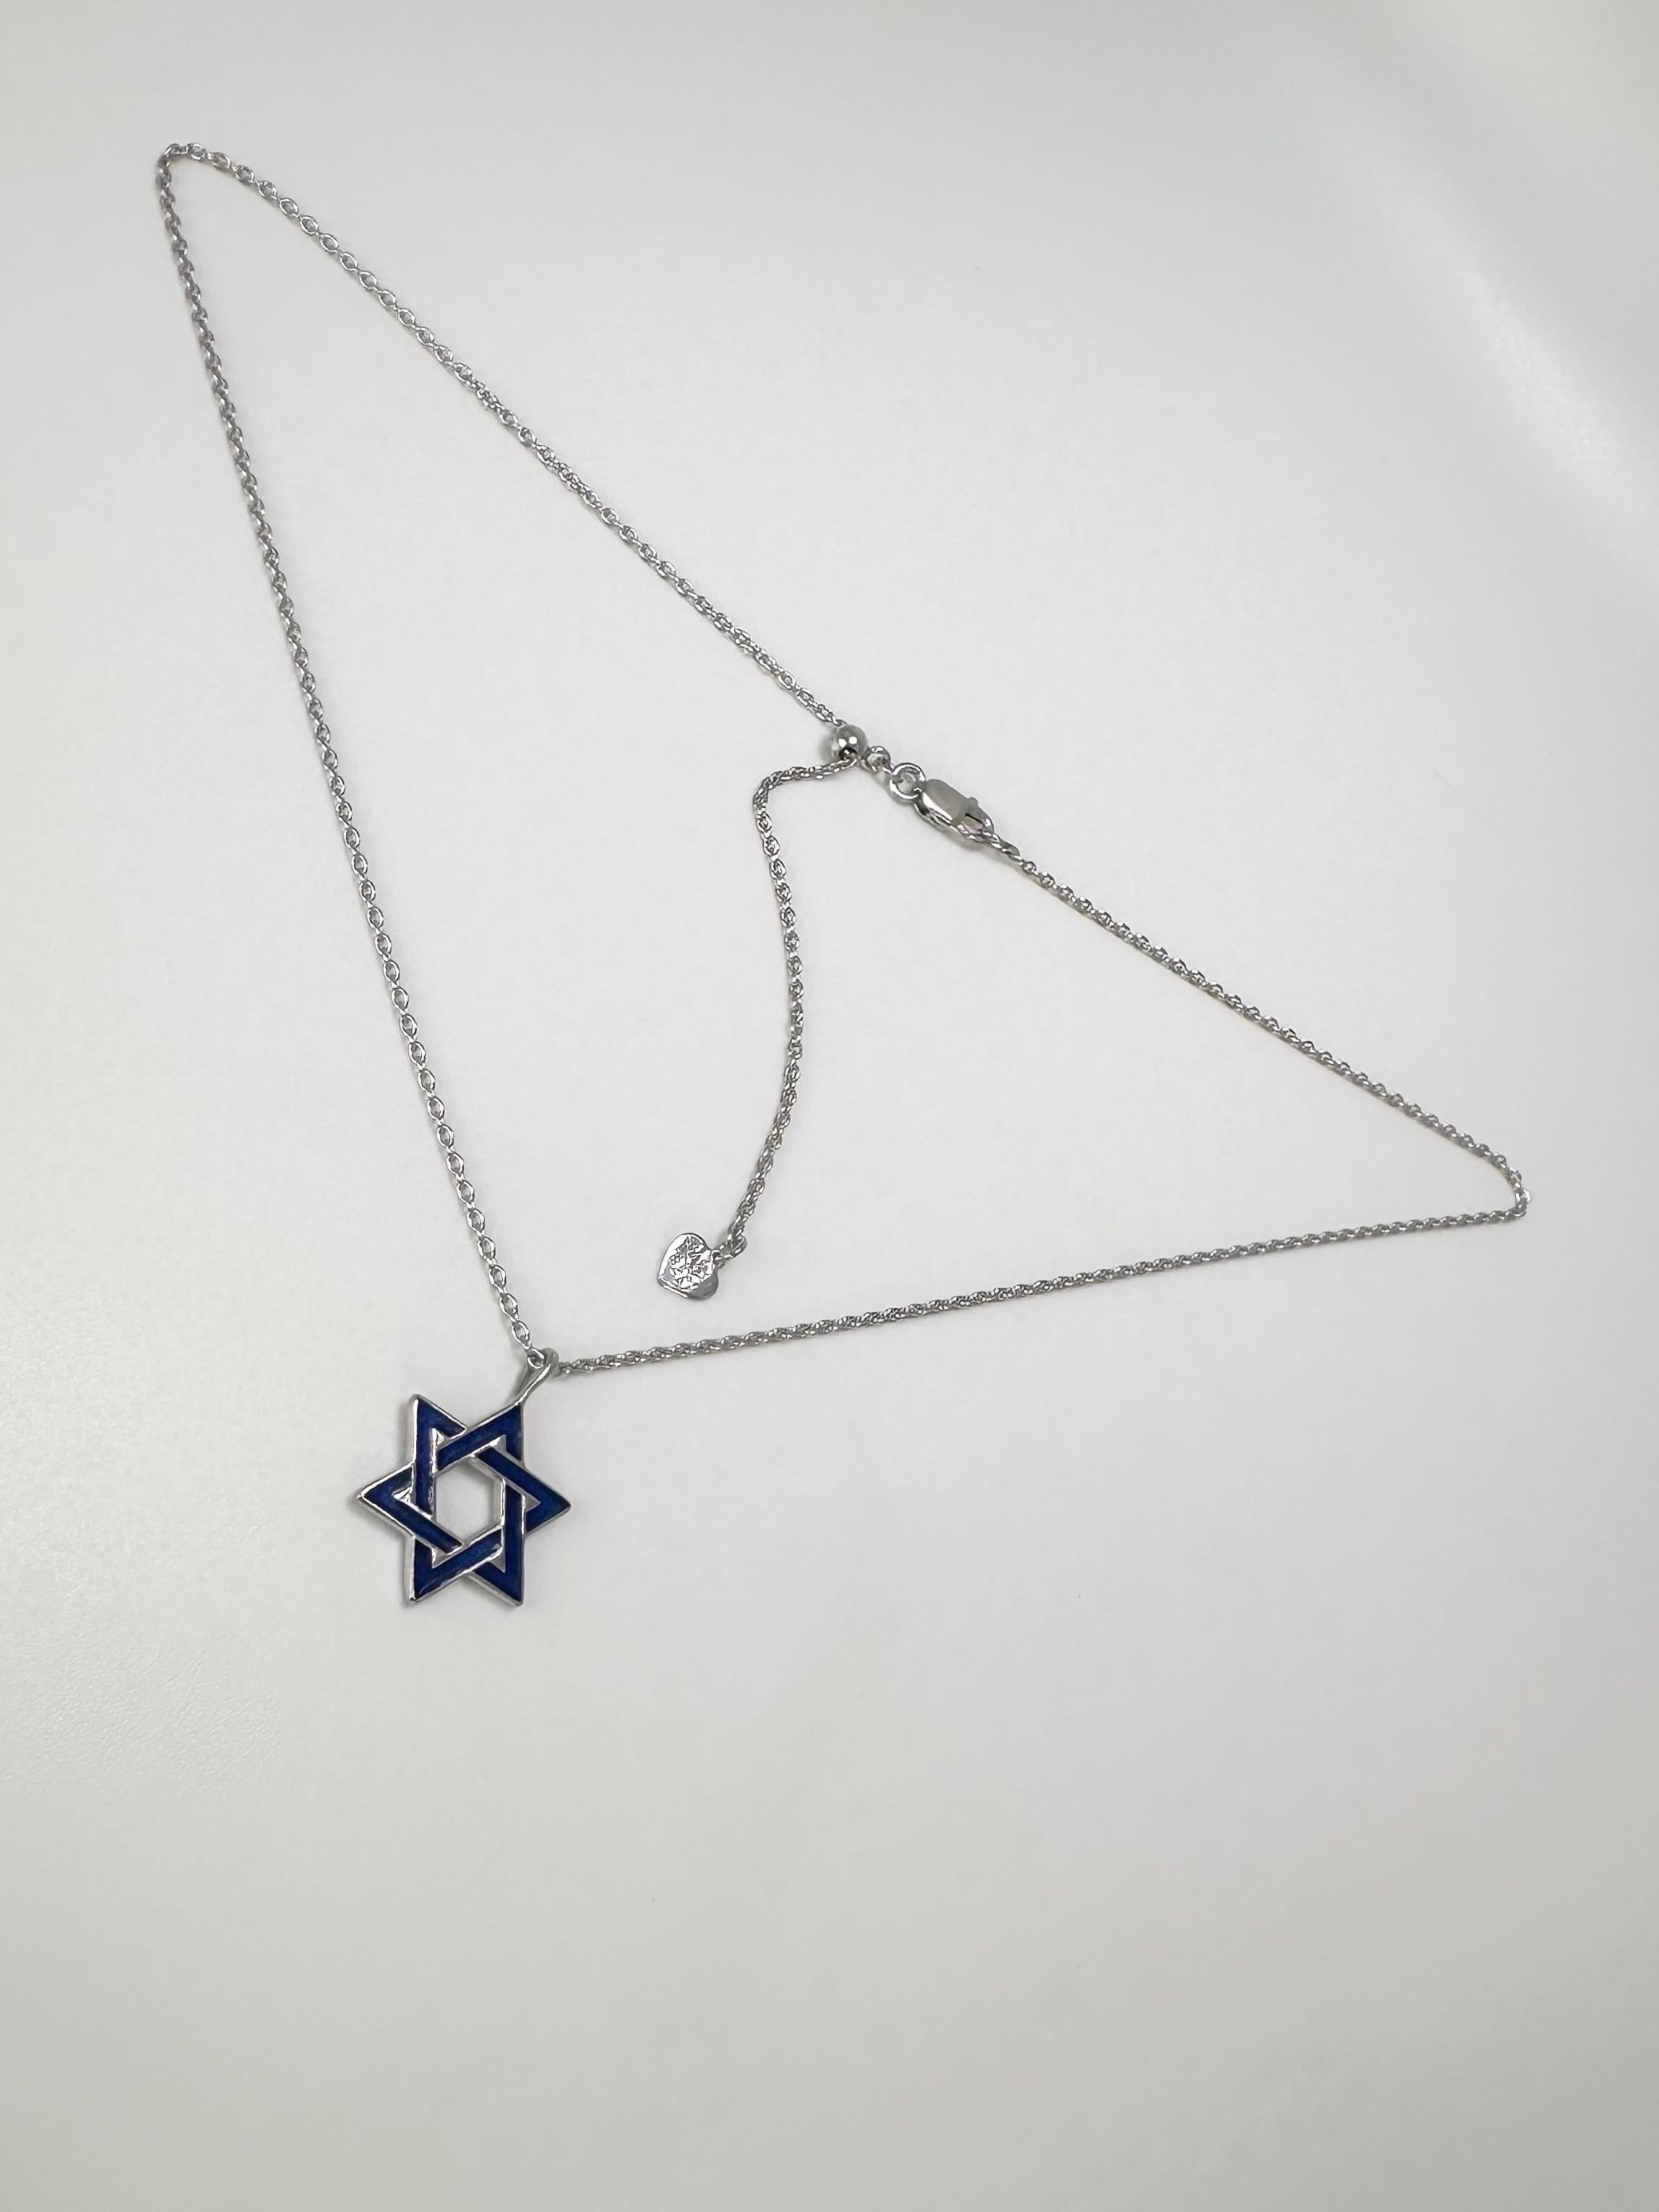 Star of David pendant necklace enamel pendant necklace SS 925 In New Condition For Sale In Jupiter, FL